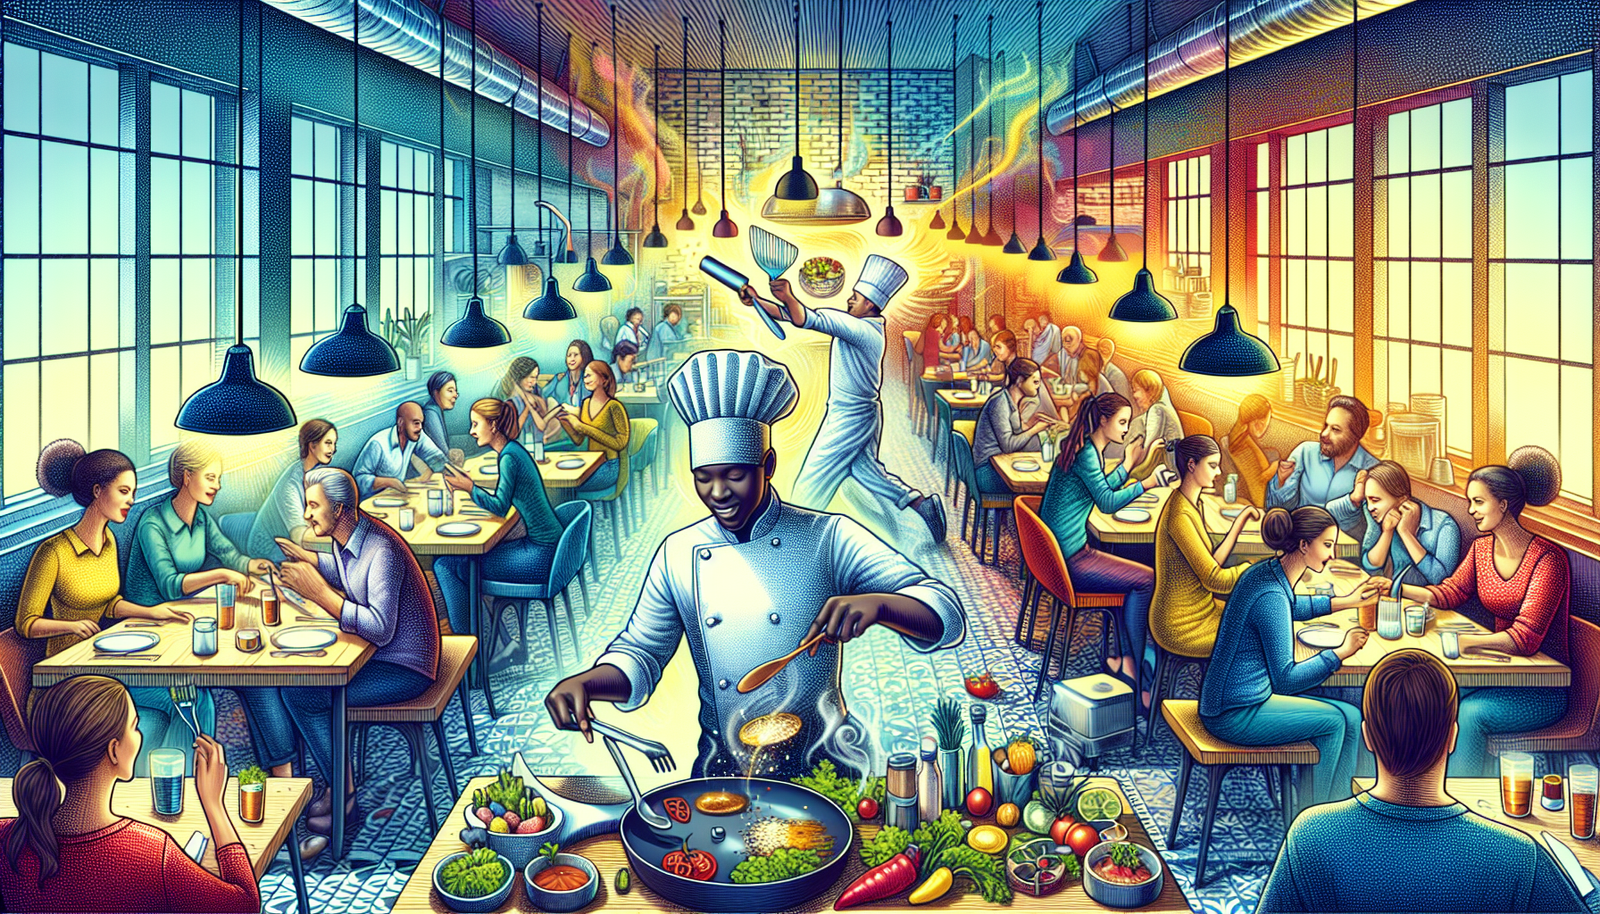 Illustration of a restaurant with a chef and customers